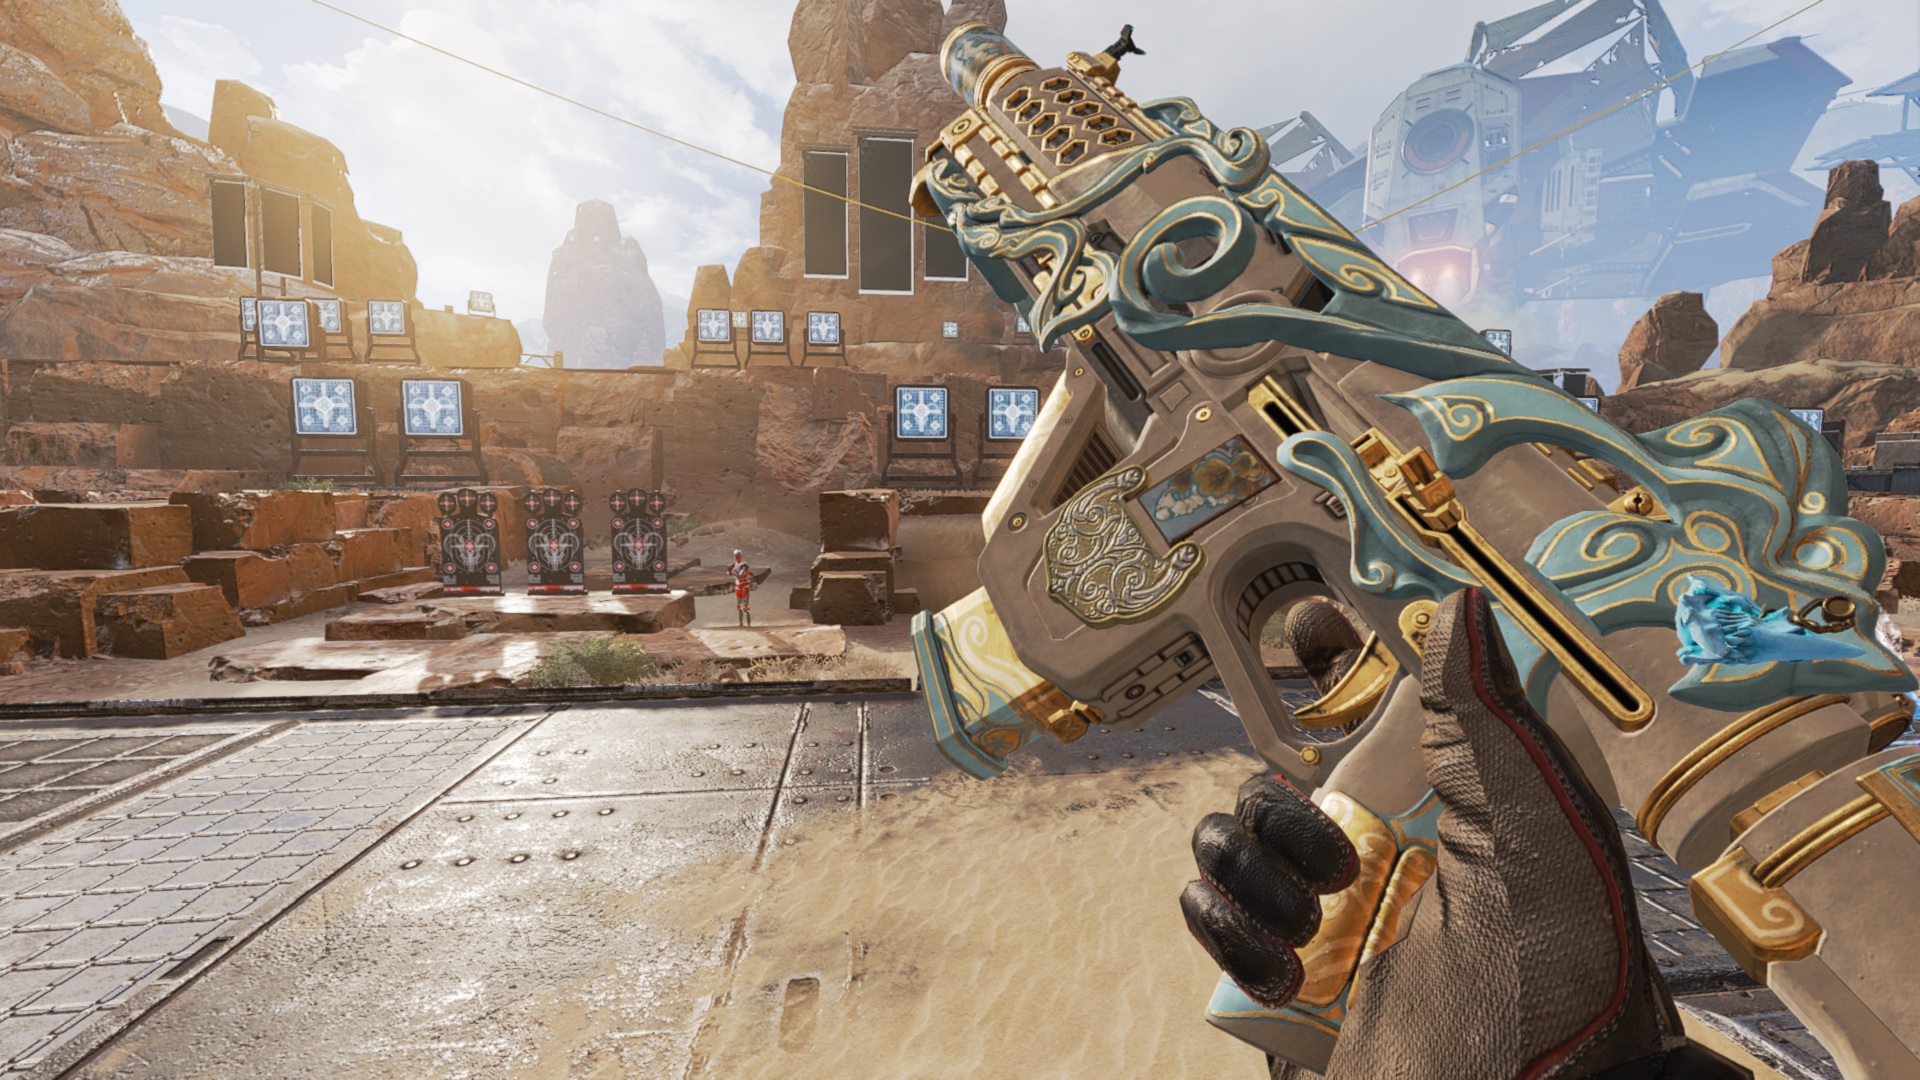 Apex Legends Arenas: An ivory Volt SMG, with pale blue highlights, is inspected. The background is a desert littered with shooting targets.